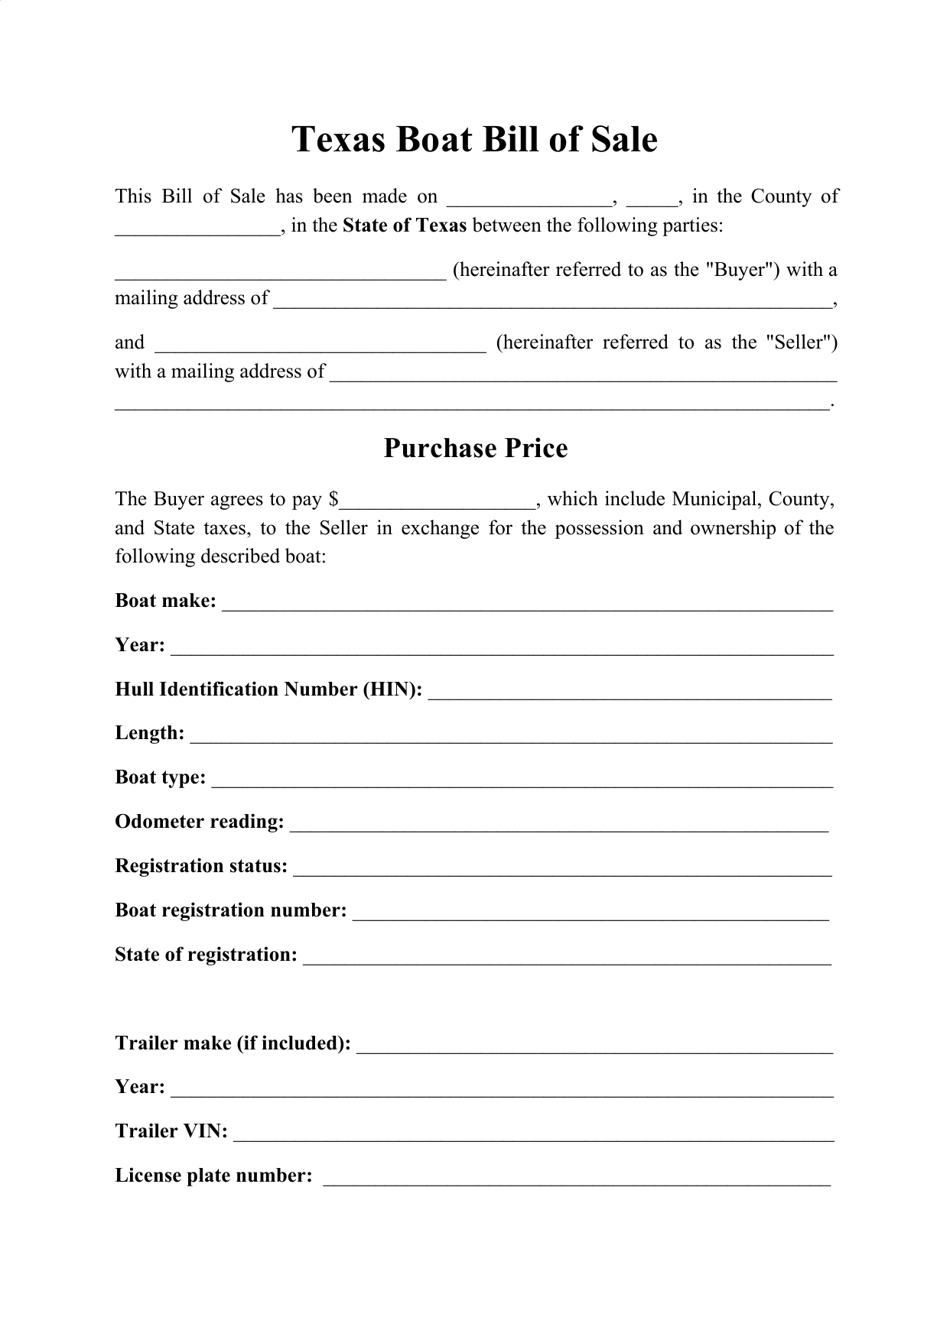 texas-boat-bill-of-sale-form-fill-out-sign-online-and-download-pdf-templateroller